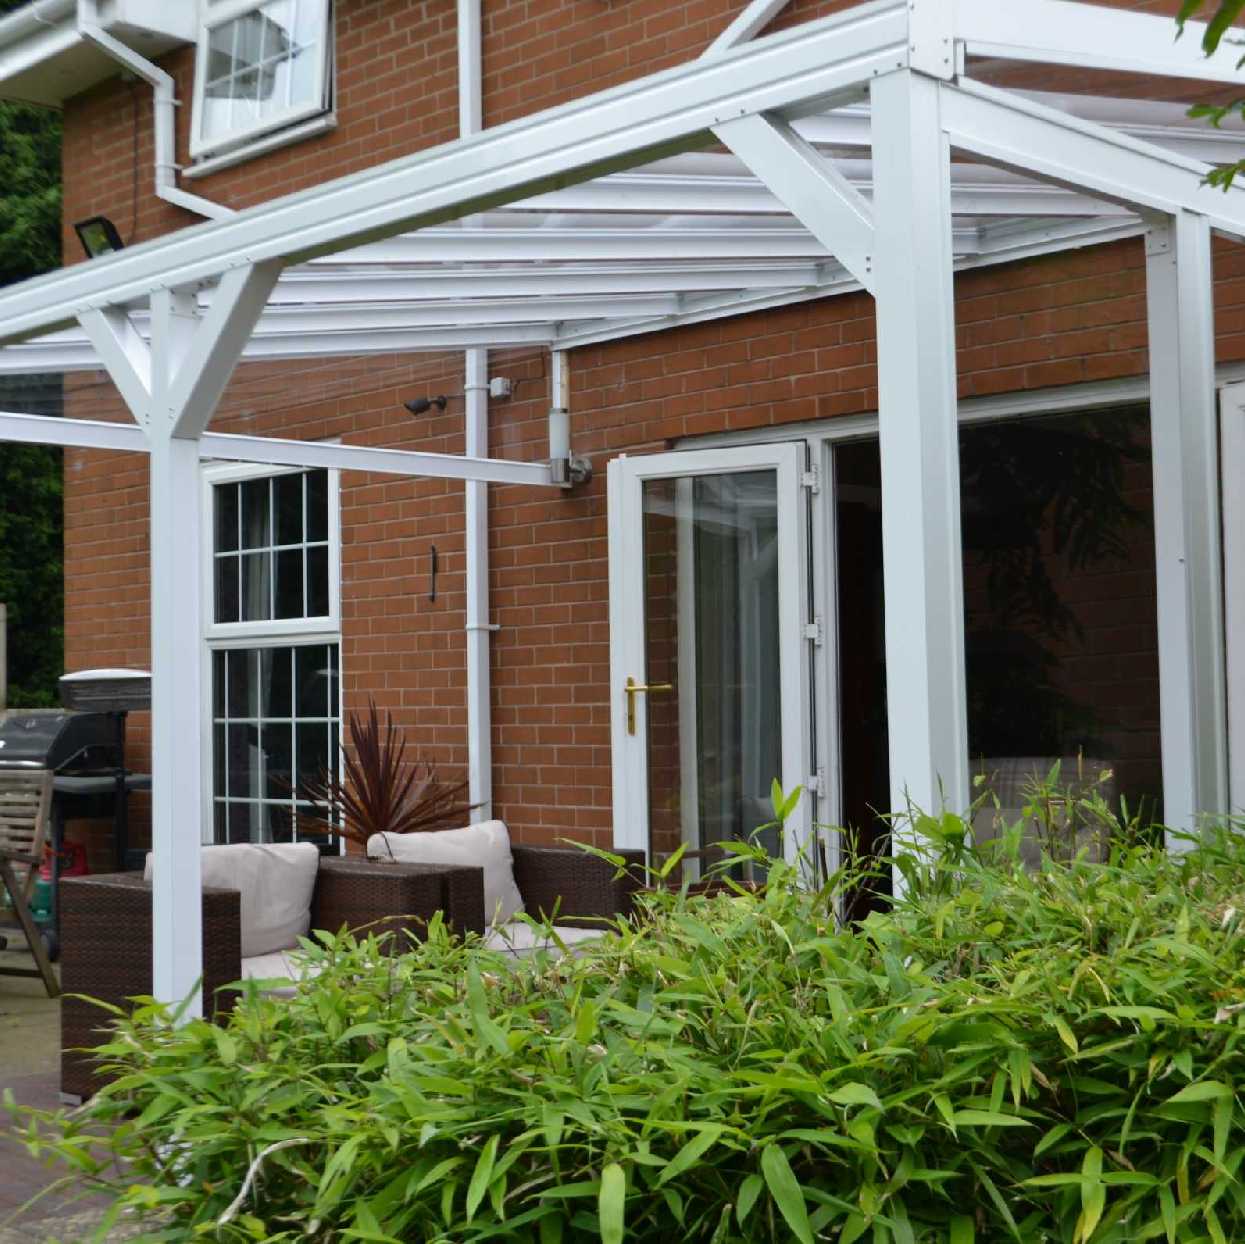 Omega Smart Lean-To Canopy, White with 6mm Glass Clear Plate Polycarbonate Glazing - 9.8m (W) x 2.0m (P), (5) Supporting Posts from Omega Build